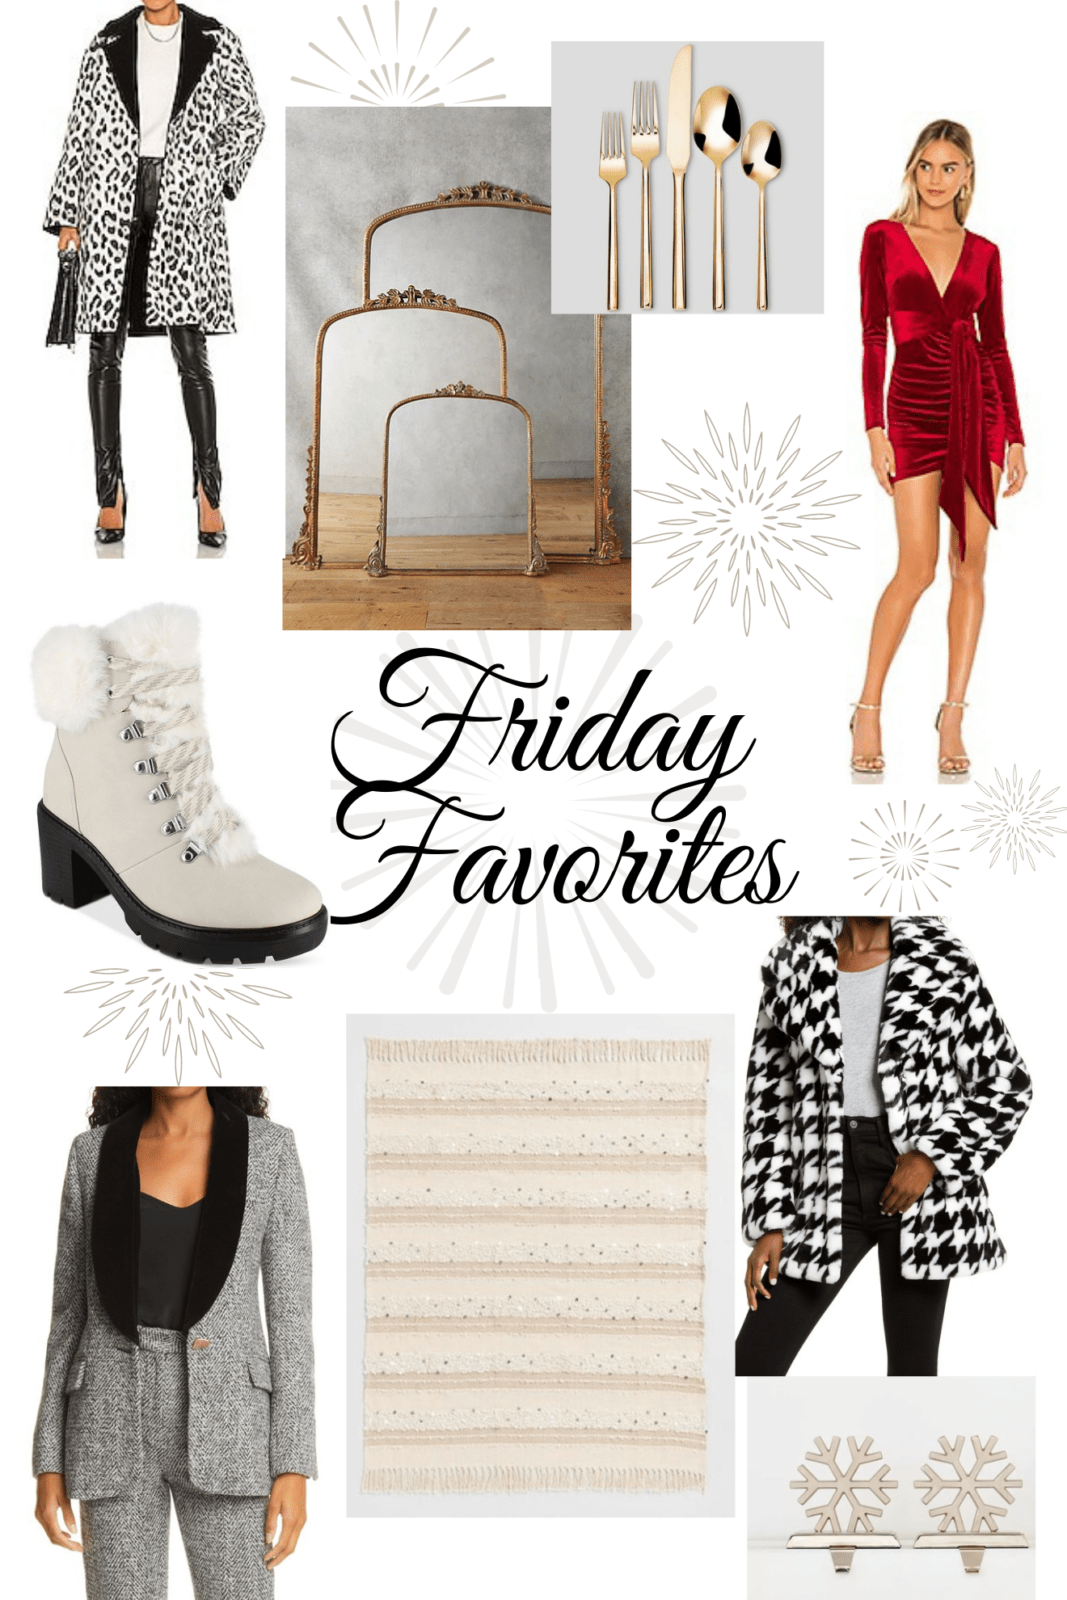 Friday Favorites by Fashion and Lifestyle Blogger Laura Lily,